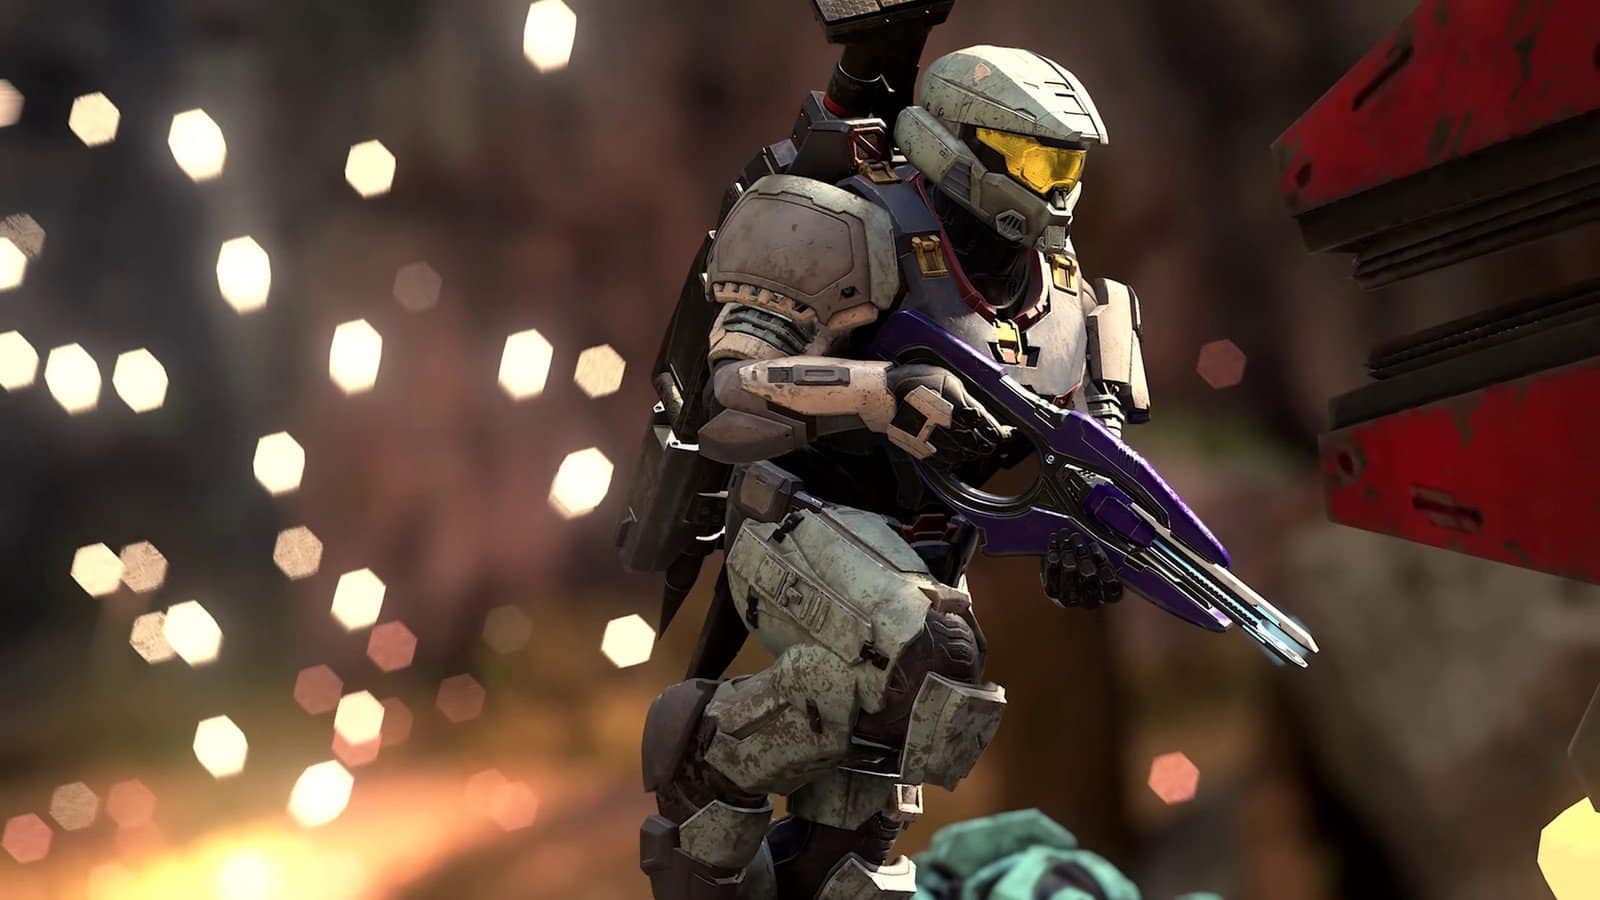 Image of a Spartan from Halo Infinite